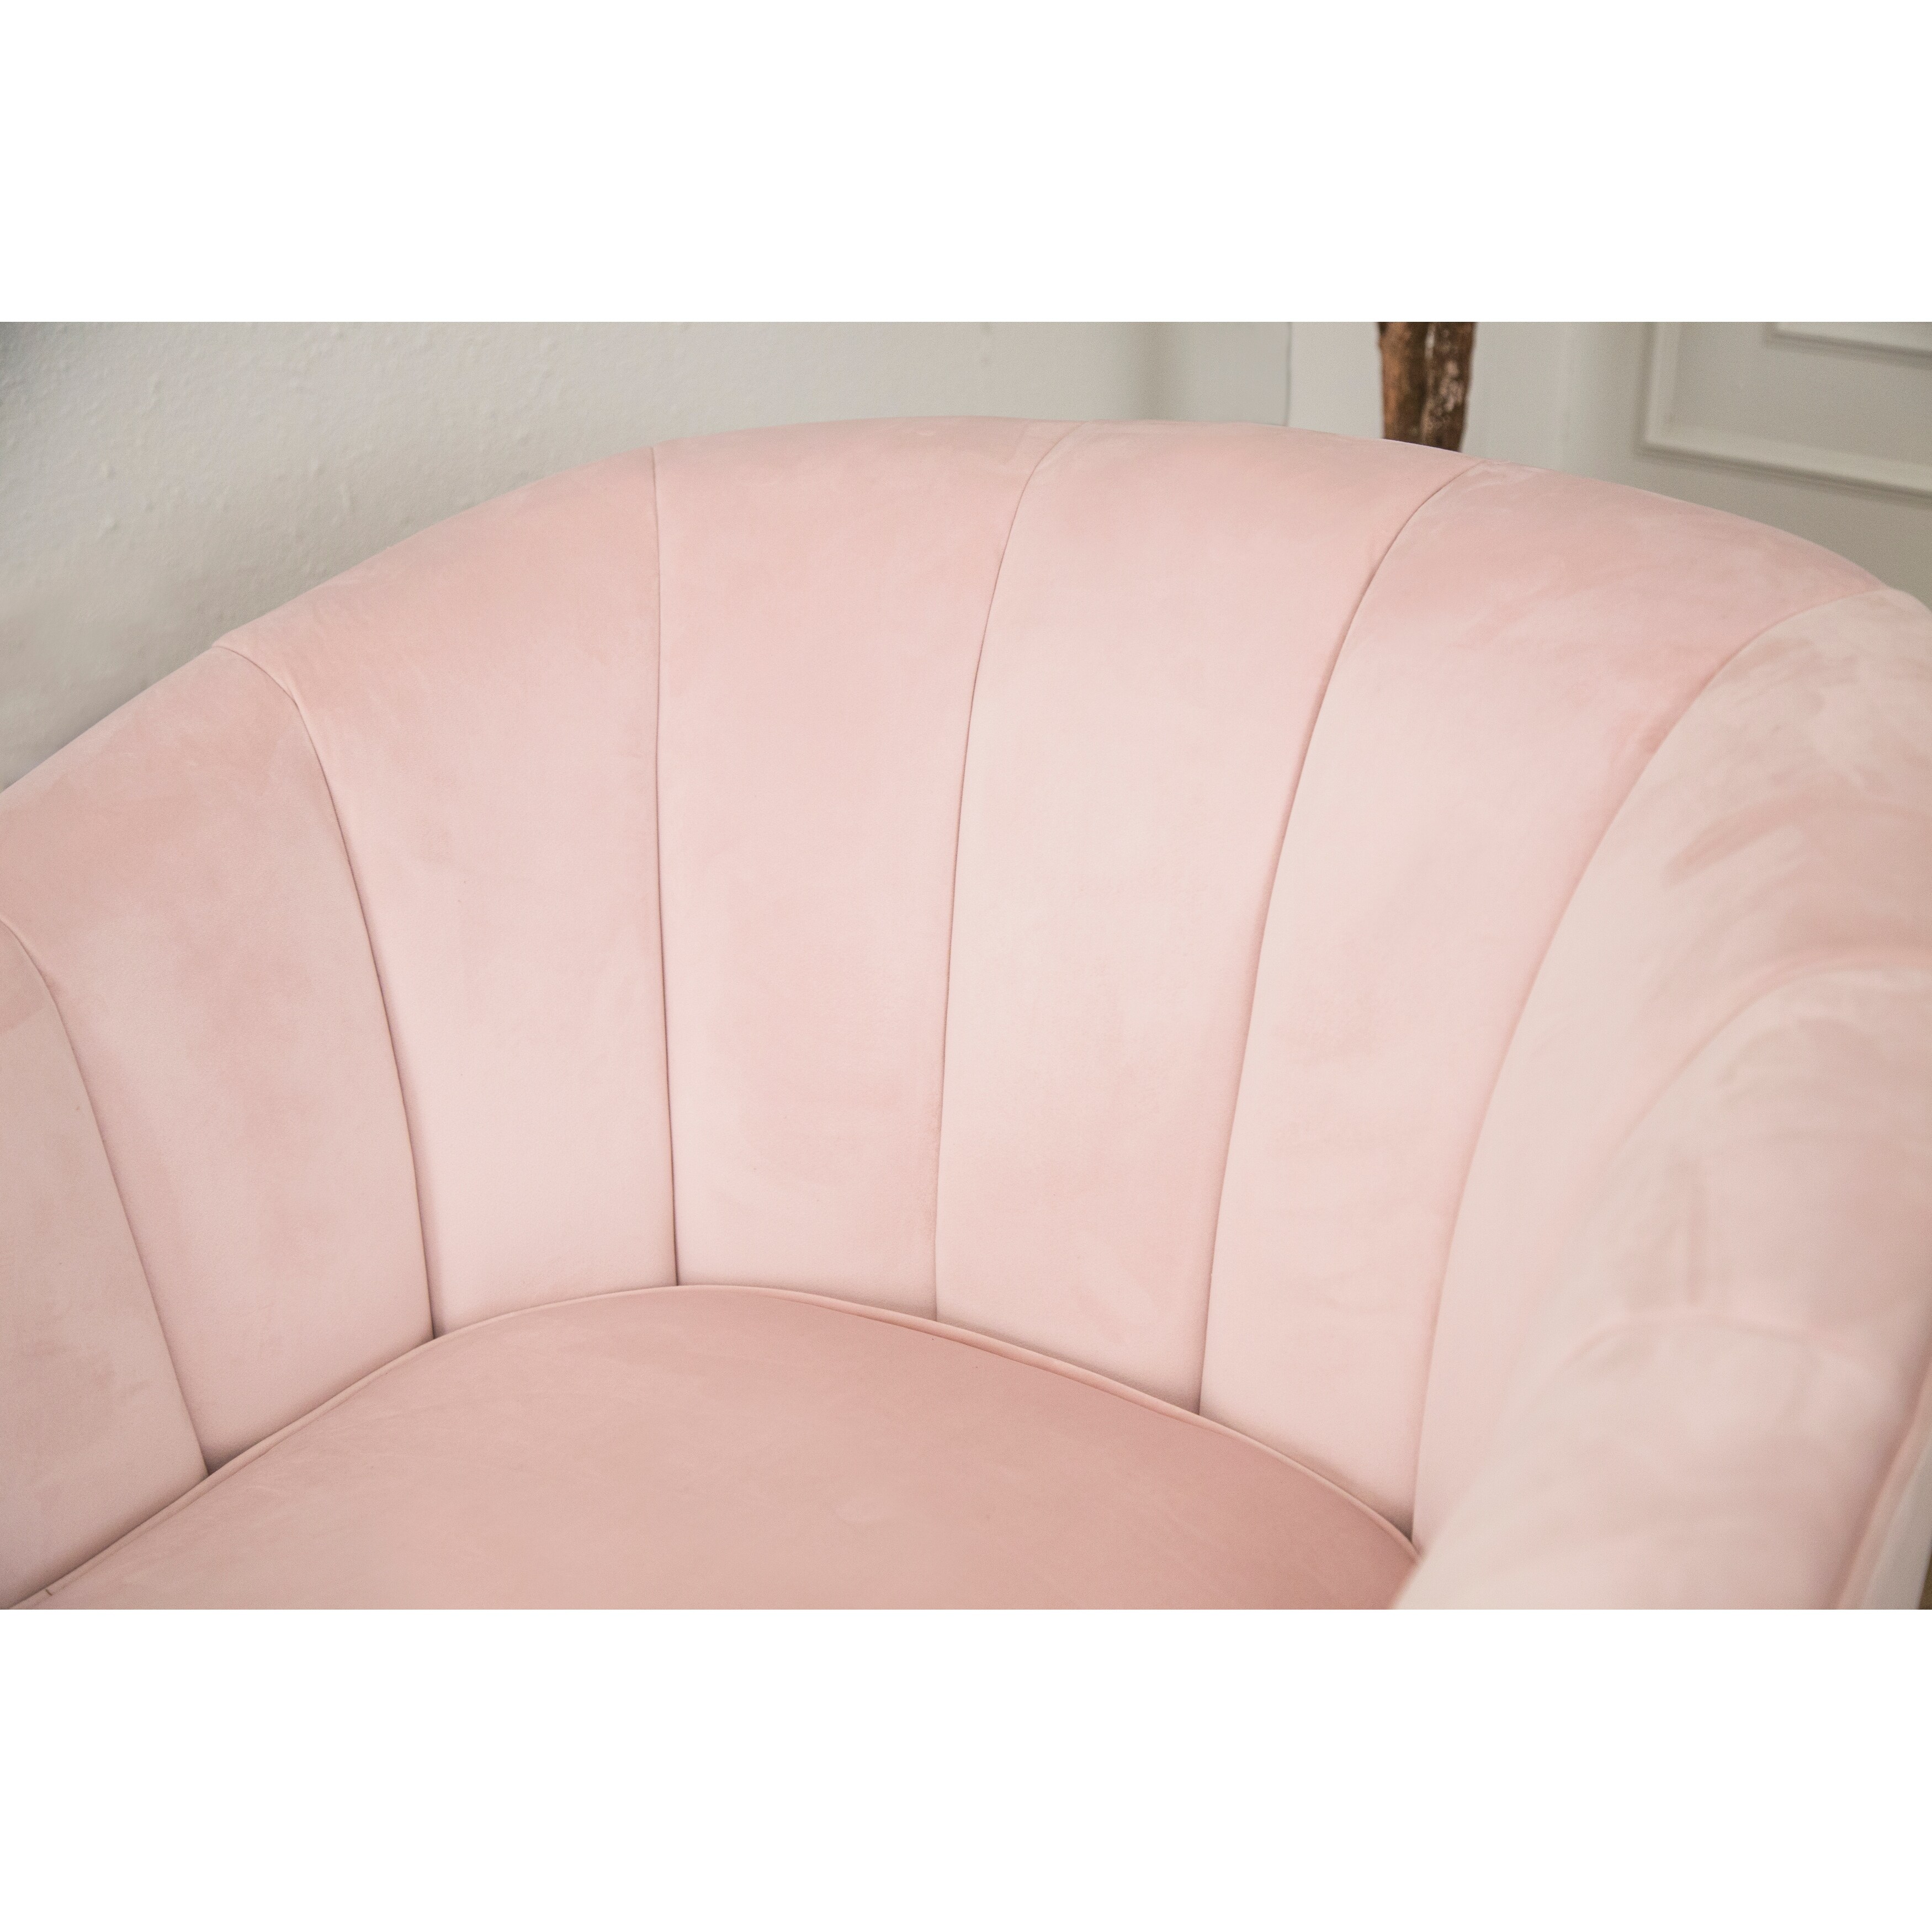 https://ak1.ostkcdn.com/images/products/is/images/direct/422cd3f9895d4d2d1a0be9cc7c509fea73eed79a/Abbyson-Channel-Tufted-Velvet-Accent-Chair%2C-Blush-Pink.jpg